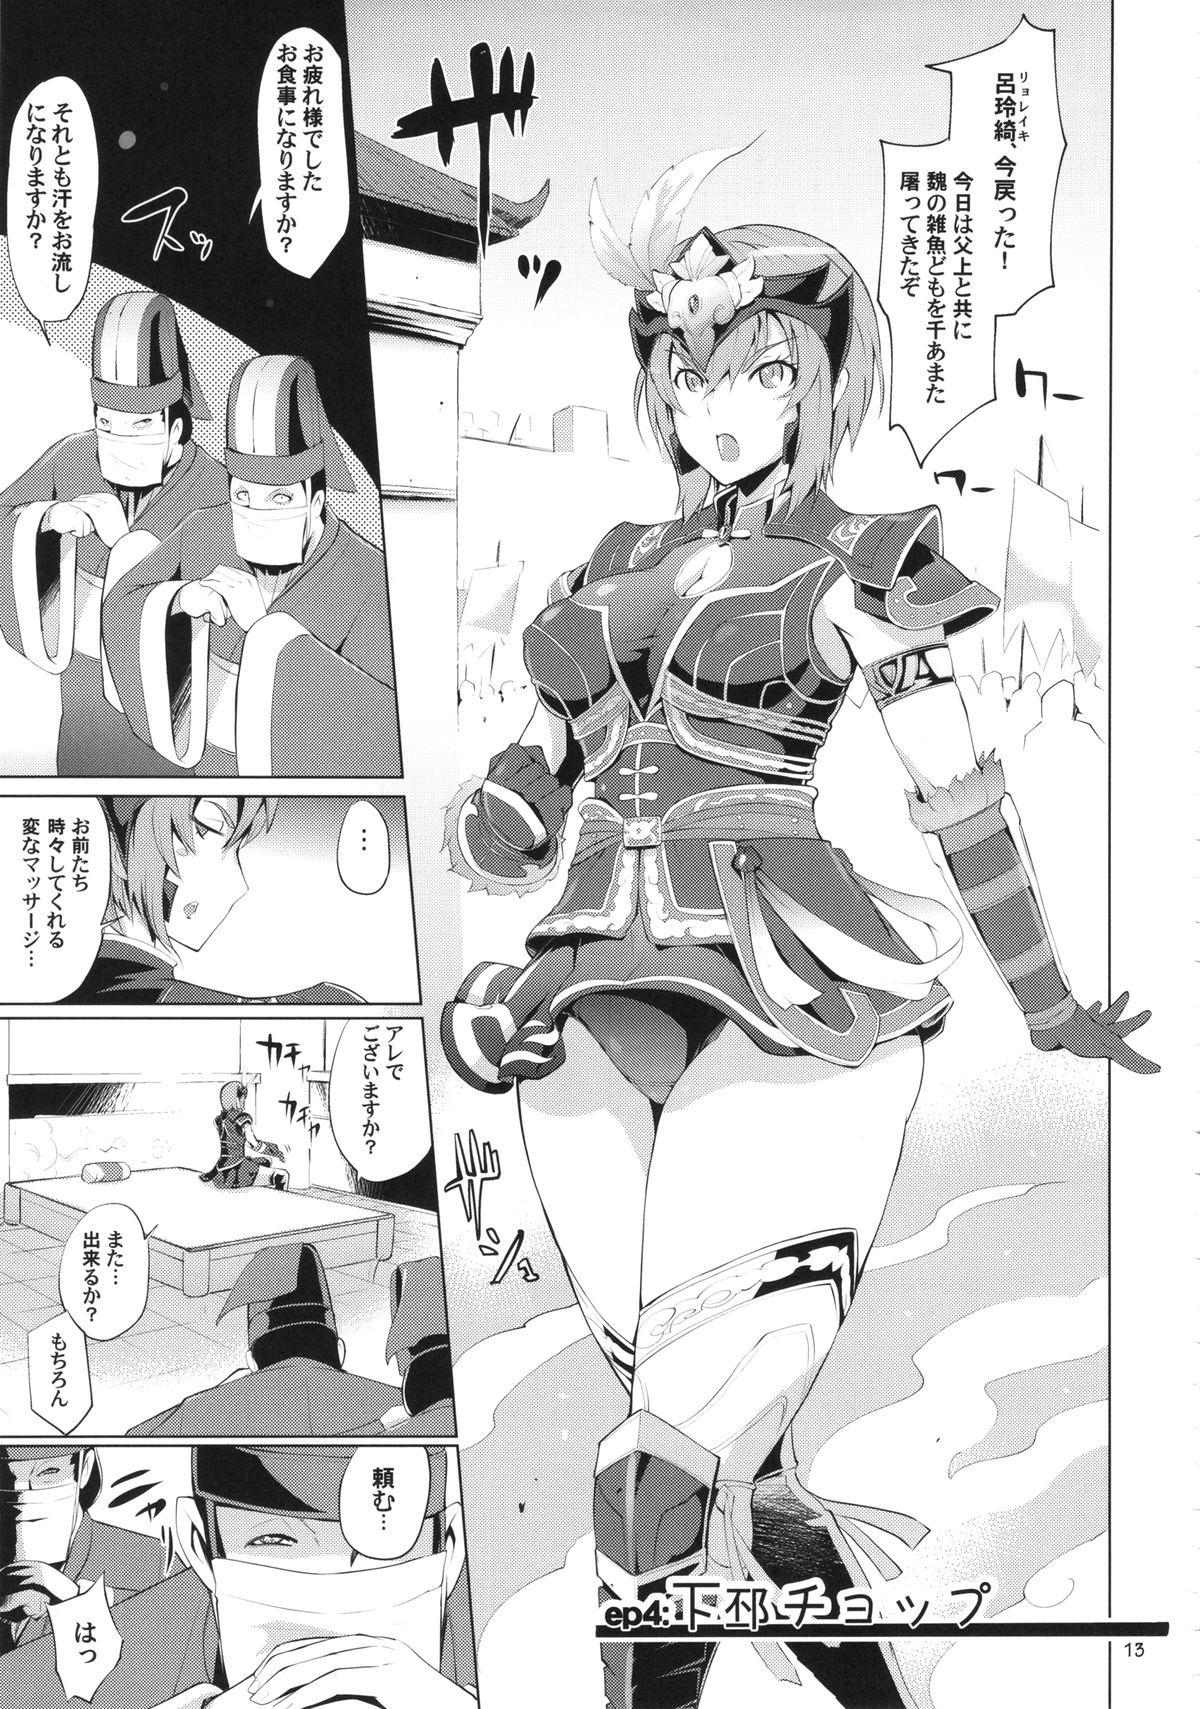 Bang Bros Musou Omnibus - Dynasty warriors Fit - Page 13